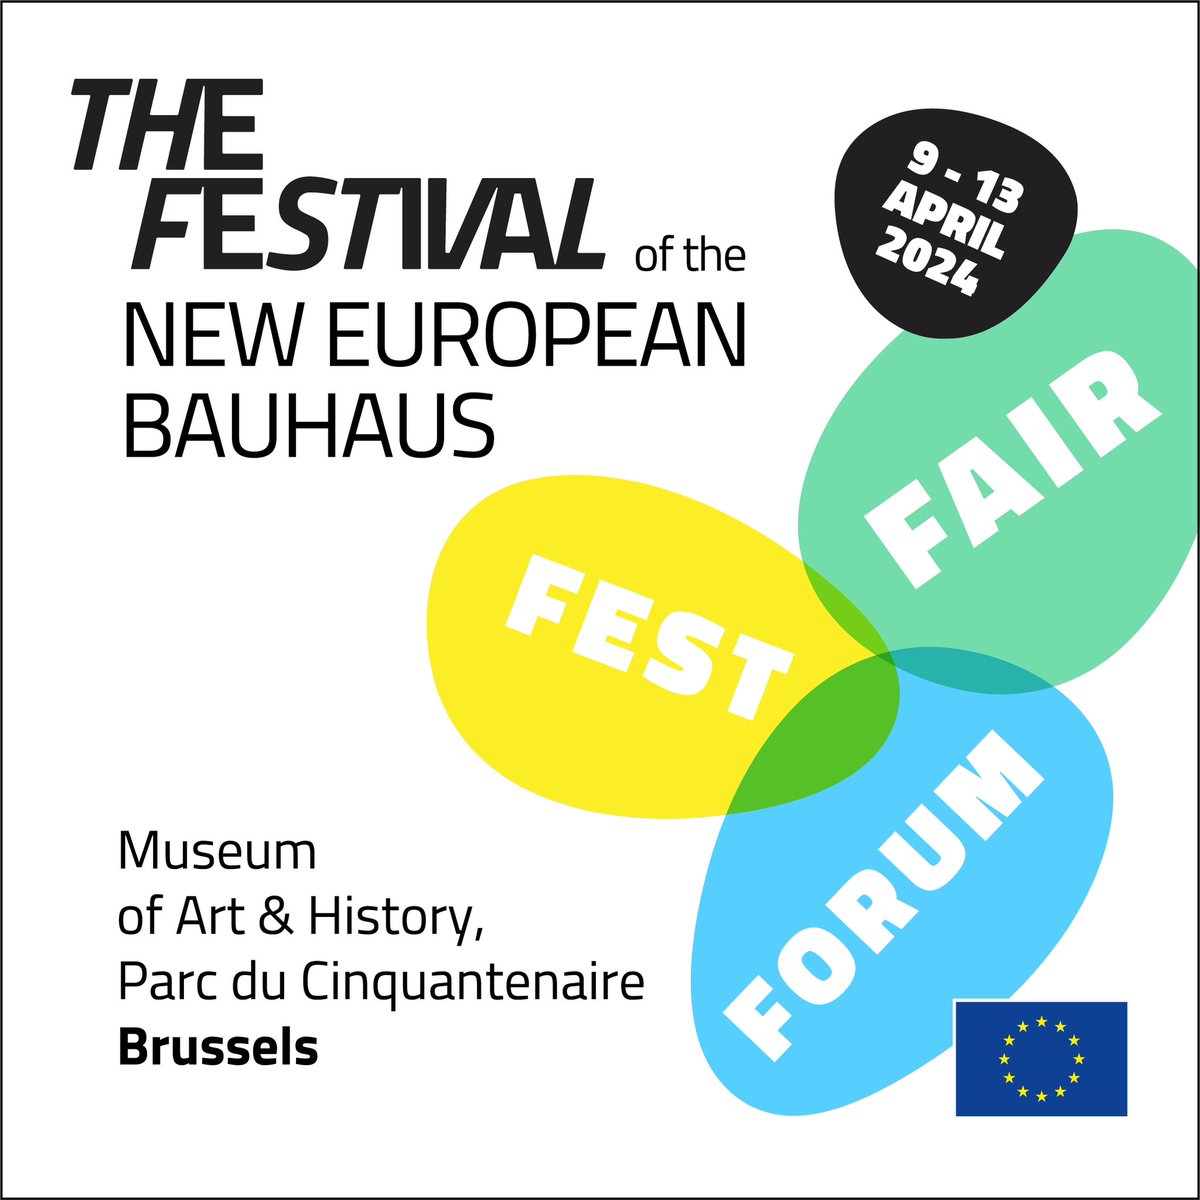 Thrilled to be part of #NewEuropeanBauhaus festival, where I’ll moderate opening panel “Earth for all, but how? People at the centre of the transition” w/ @NakabuyeHildaF @beyond_ideology #KurtVandenberghe & more on 10 April.   Join us: new-european-bauhaus-festival.eu @EU_Commission